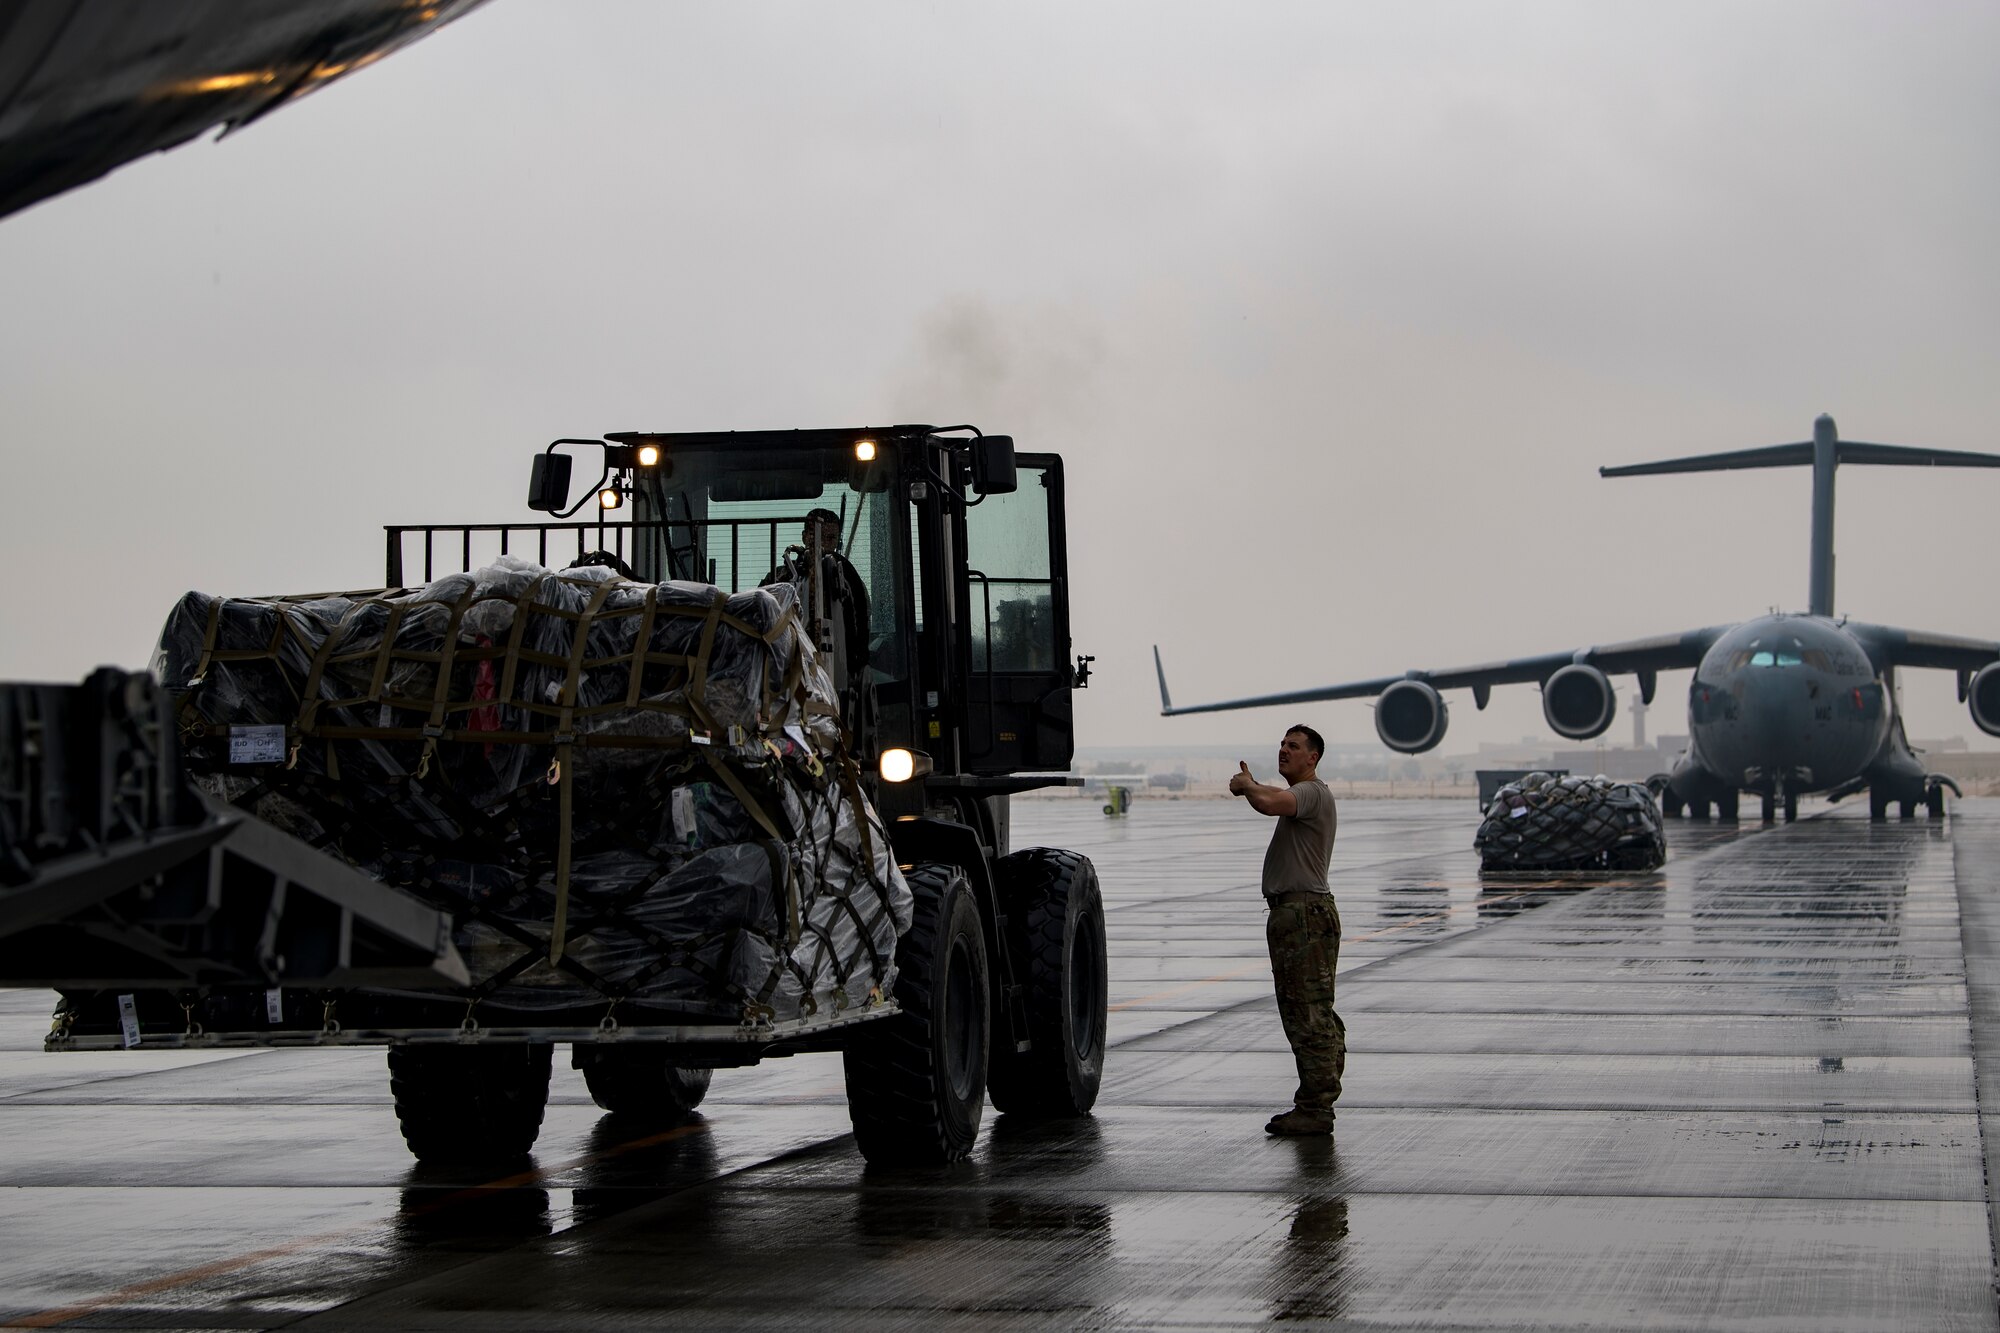 A U.S. Air Force loadmaster assigned to the 816th Expeditionary Airlift Squadron, right, guides a U.S. Air Force aerial porter assigned to the 746th Expeditionary Logistics Readiness Squadron transporting cargo to a U.S. Air Force C-17 Globemaster III at Al Udeid Air Base, Qatar, Jan. 10, 2020.